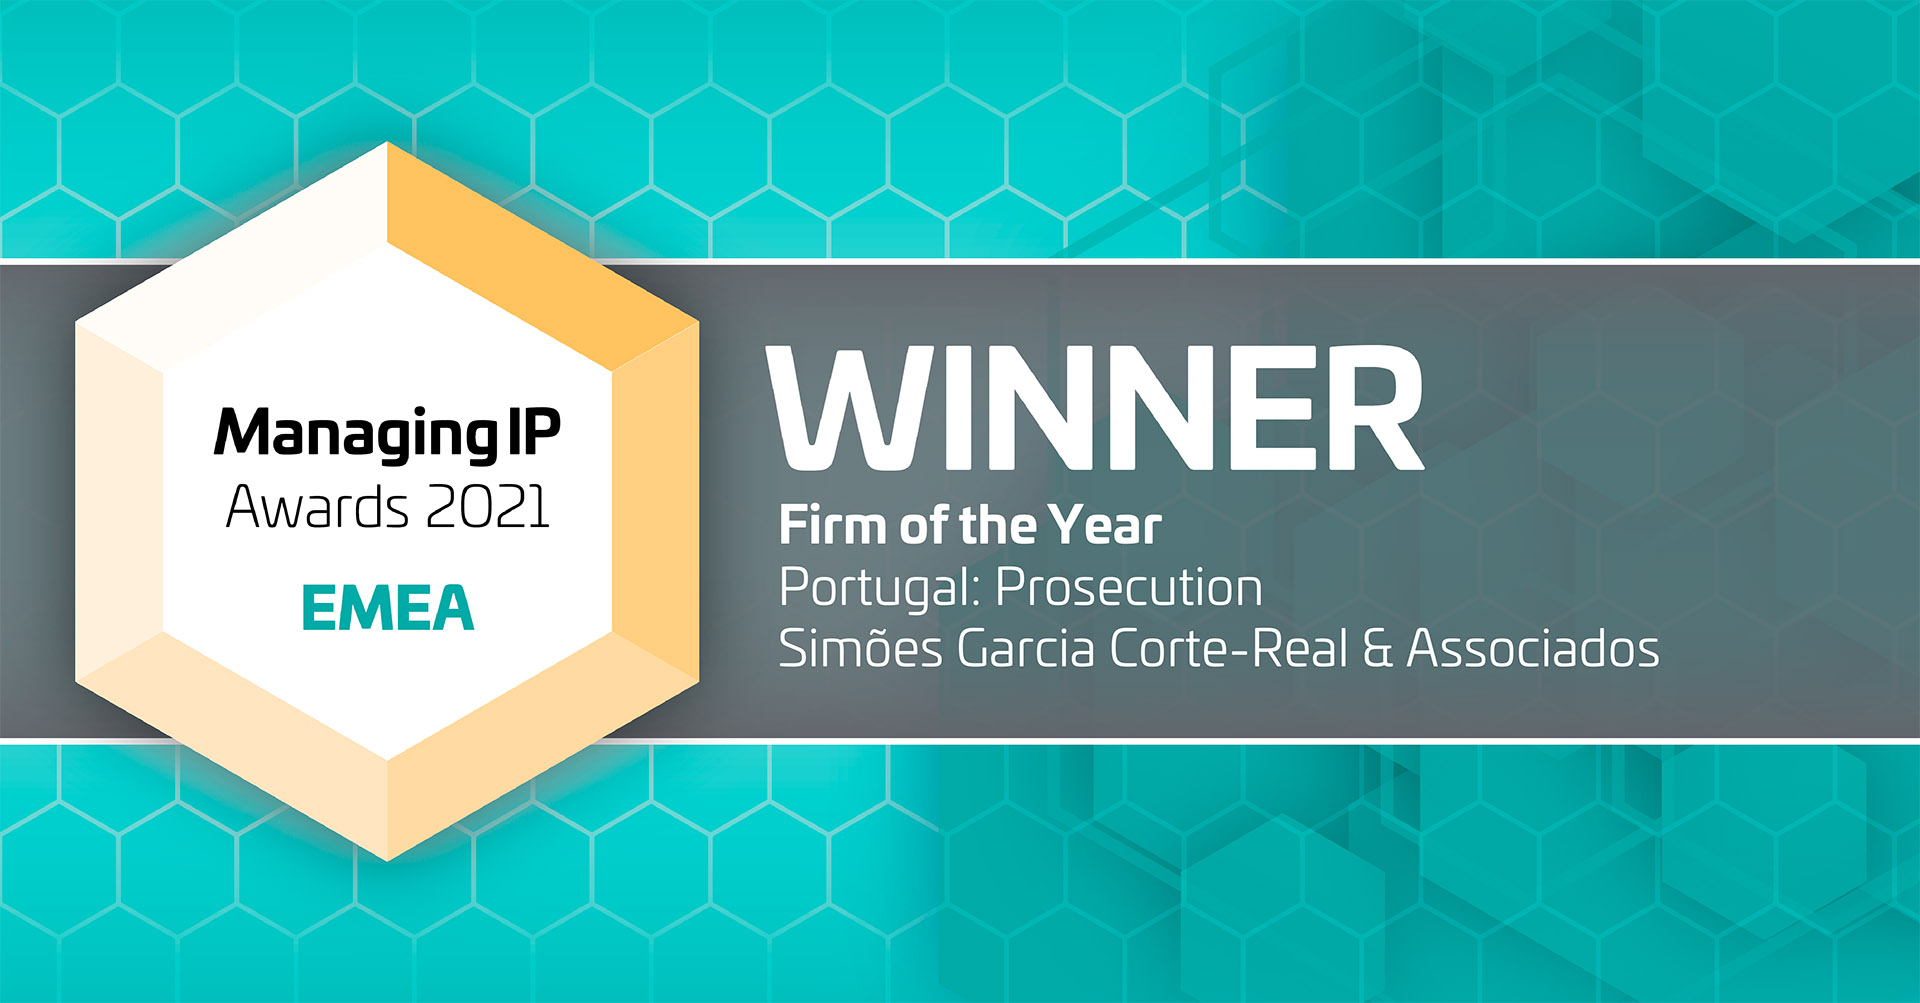 MIP Awards 2021 “Trademark Prosecution Firm of the Year” in Portugal